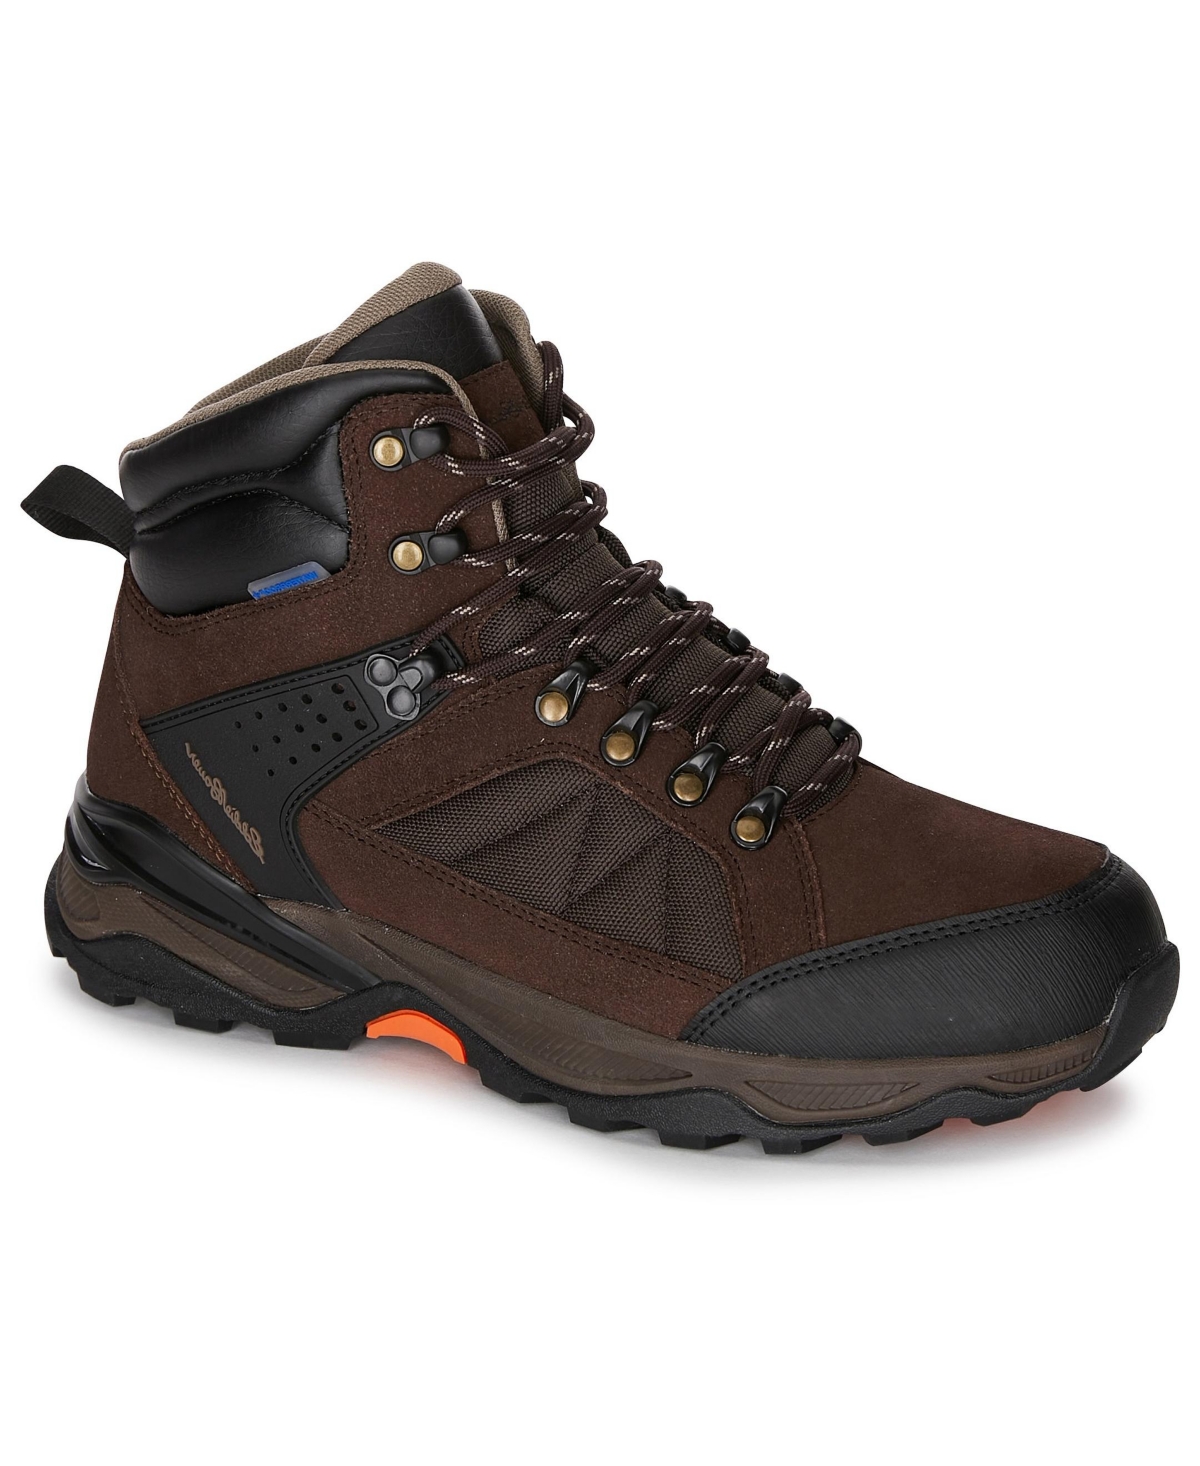 Men's Mount Hood Hiking Lace-Up Boots - Chocolate